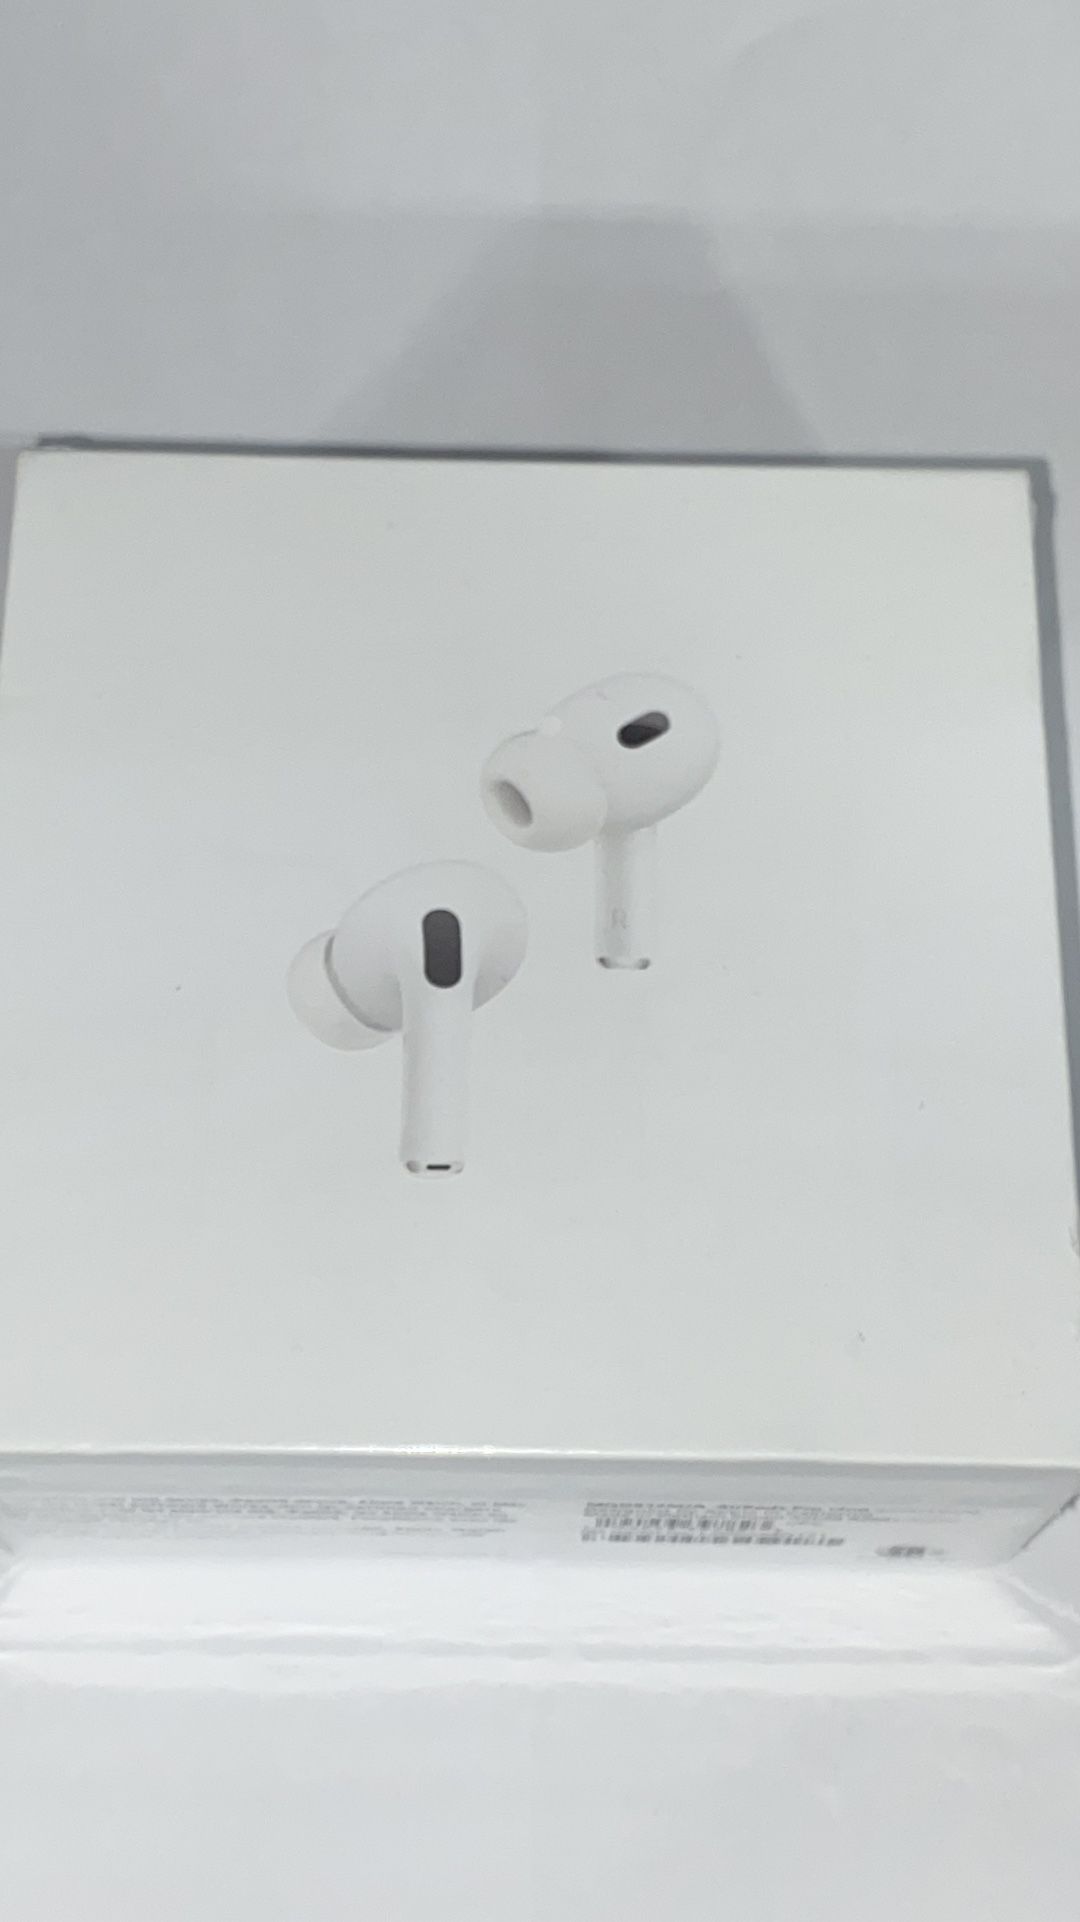 airpods pro generation 2, technology, headphones,accessories for phones 